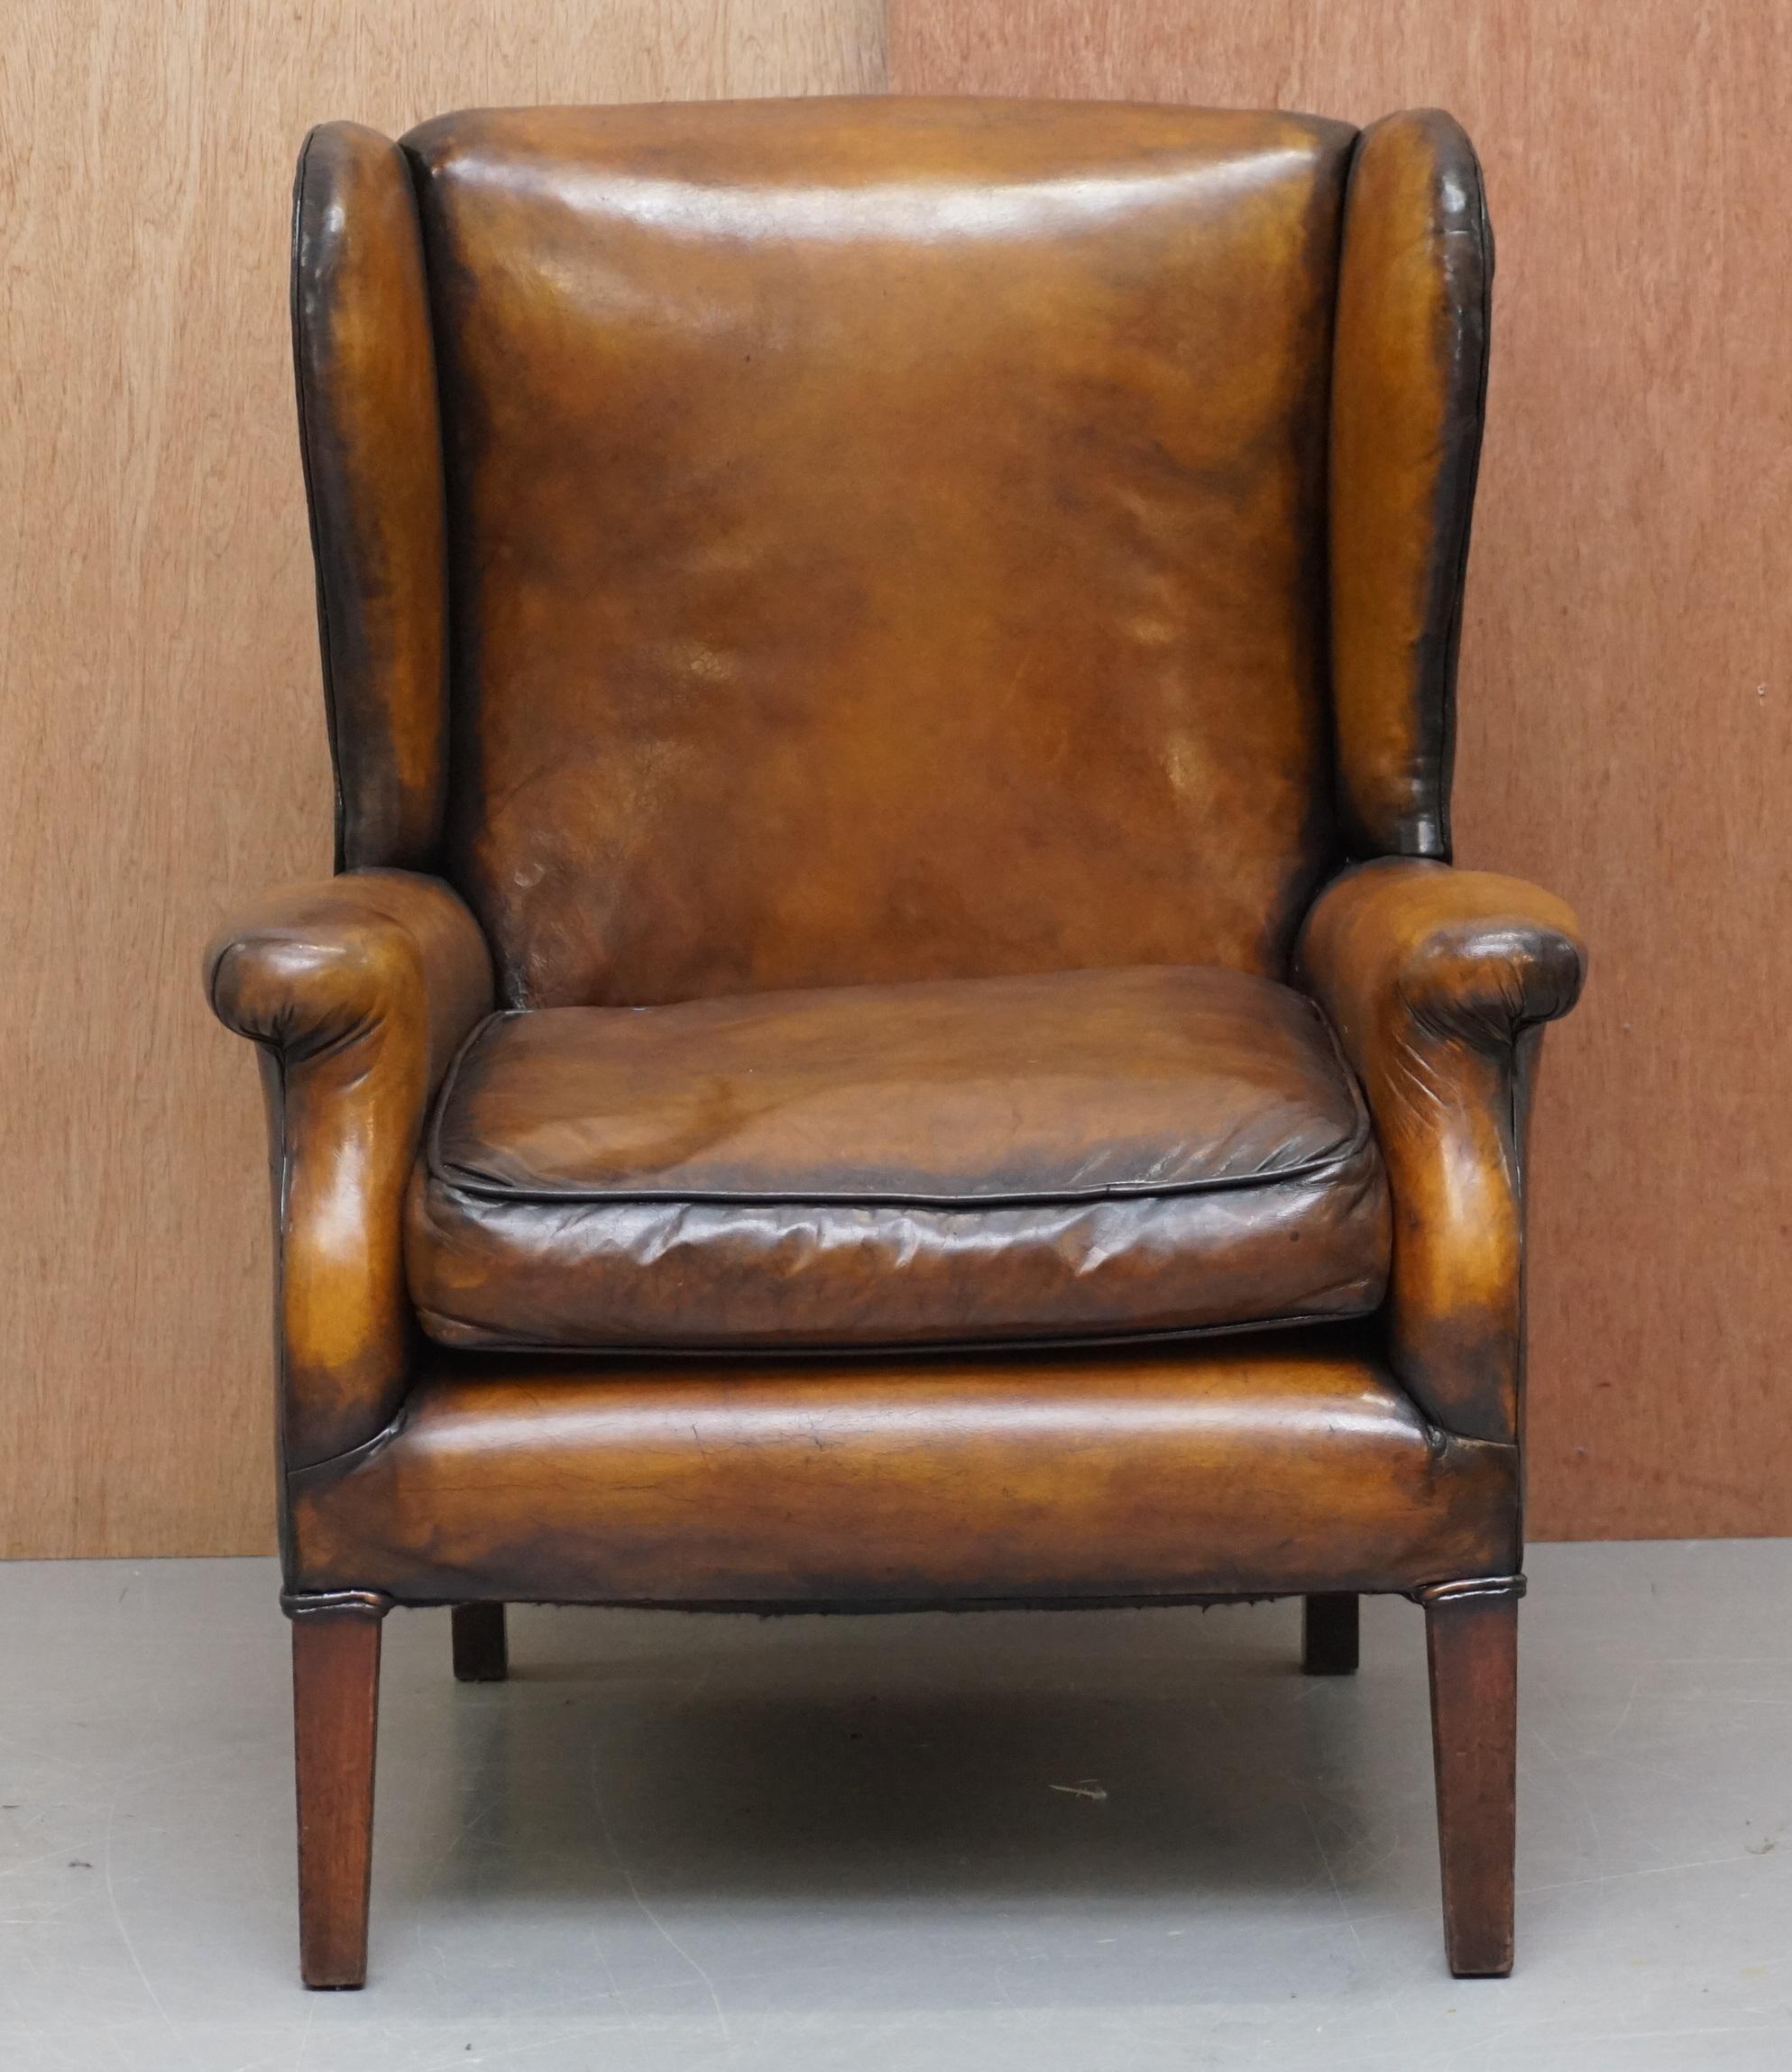 We are delighted to offer for sale this stunning fully restored cigar brown hand dyed leather Edwardian wingback club armchair with nicely sculpted frame

A very good looking and nicely refurbished piece. This is an original Edwardian circa 1910